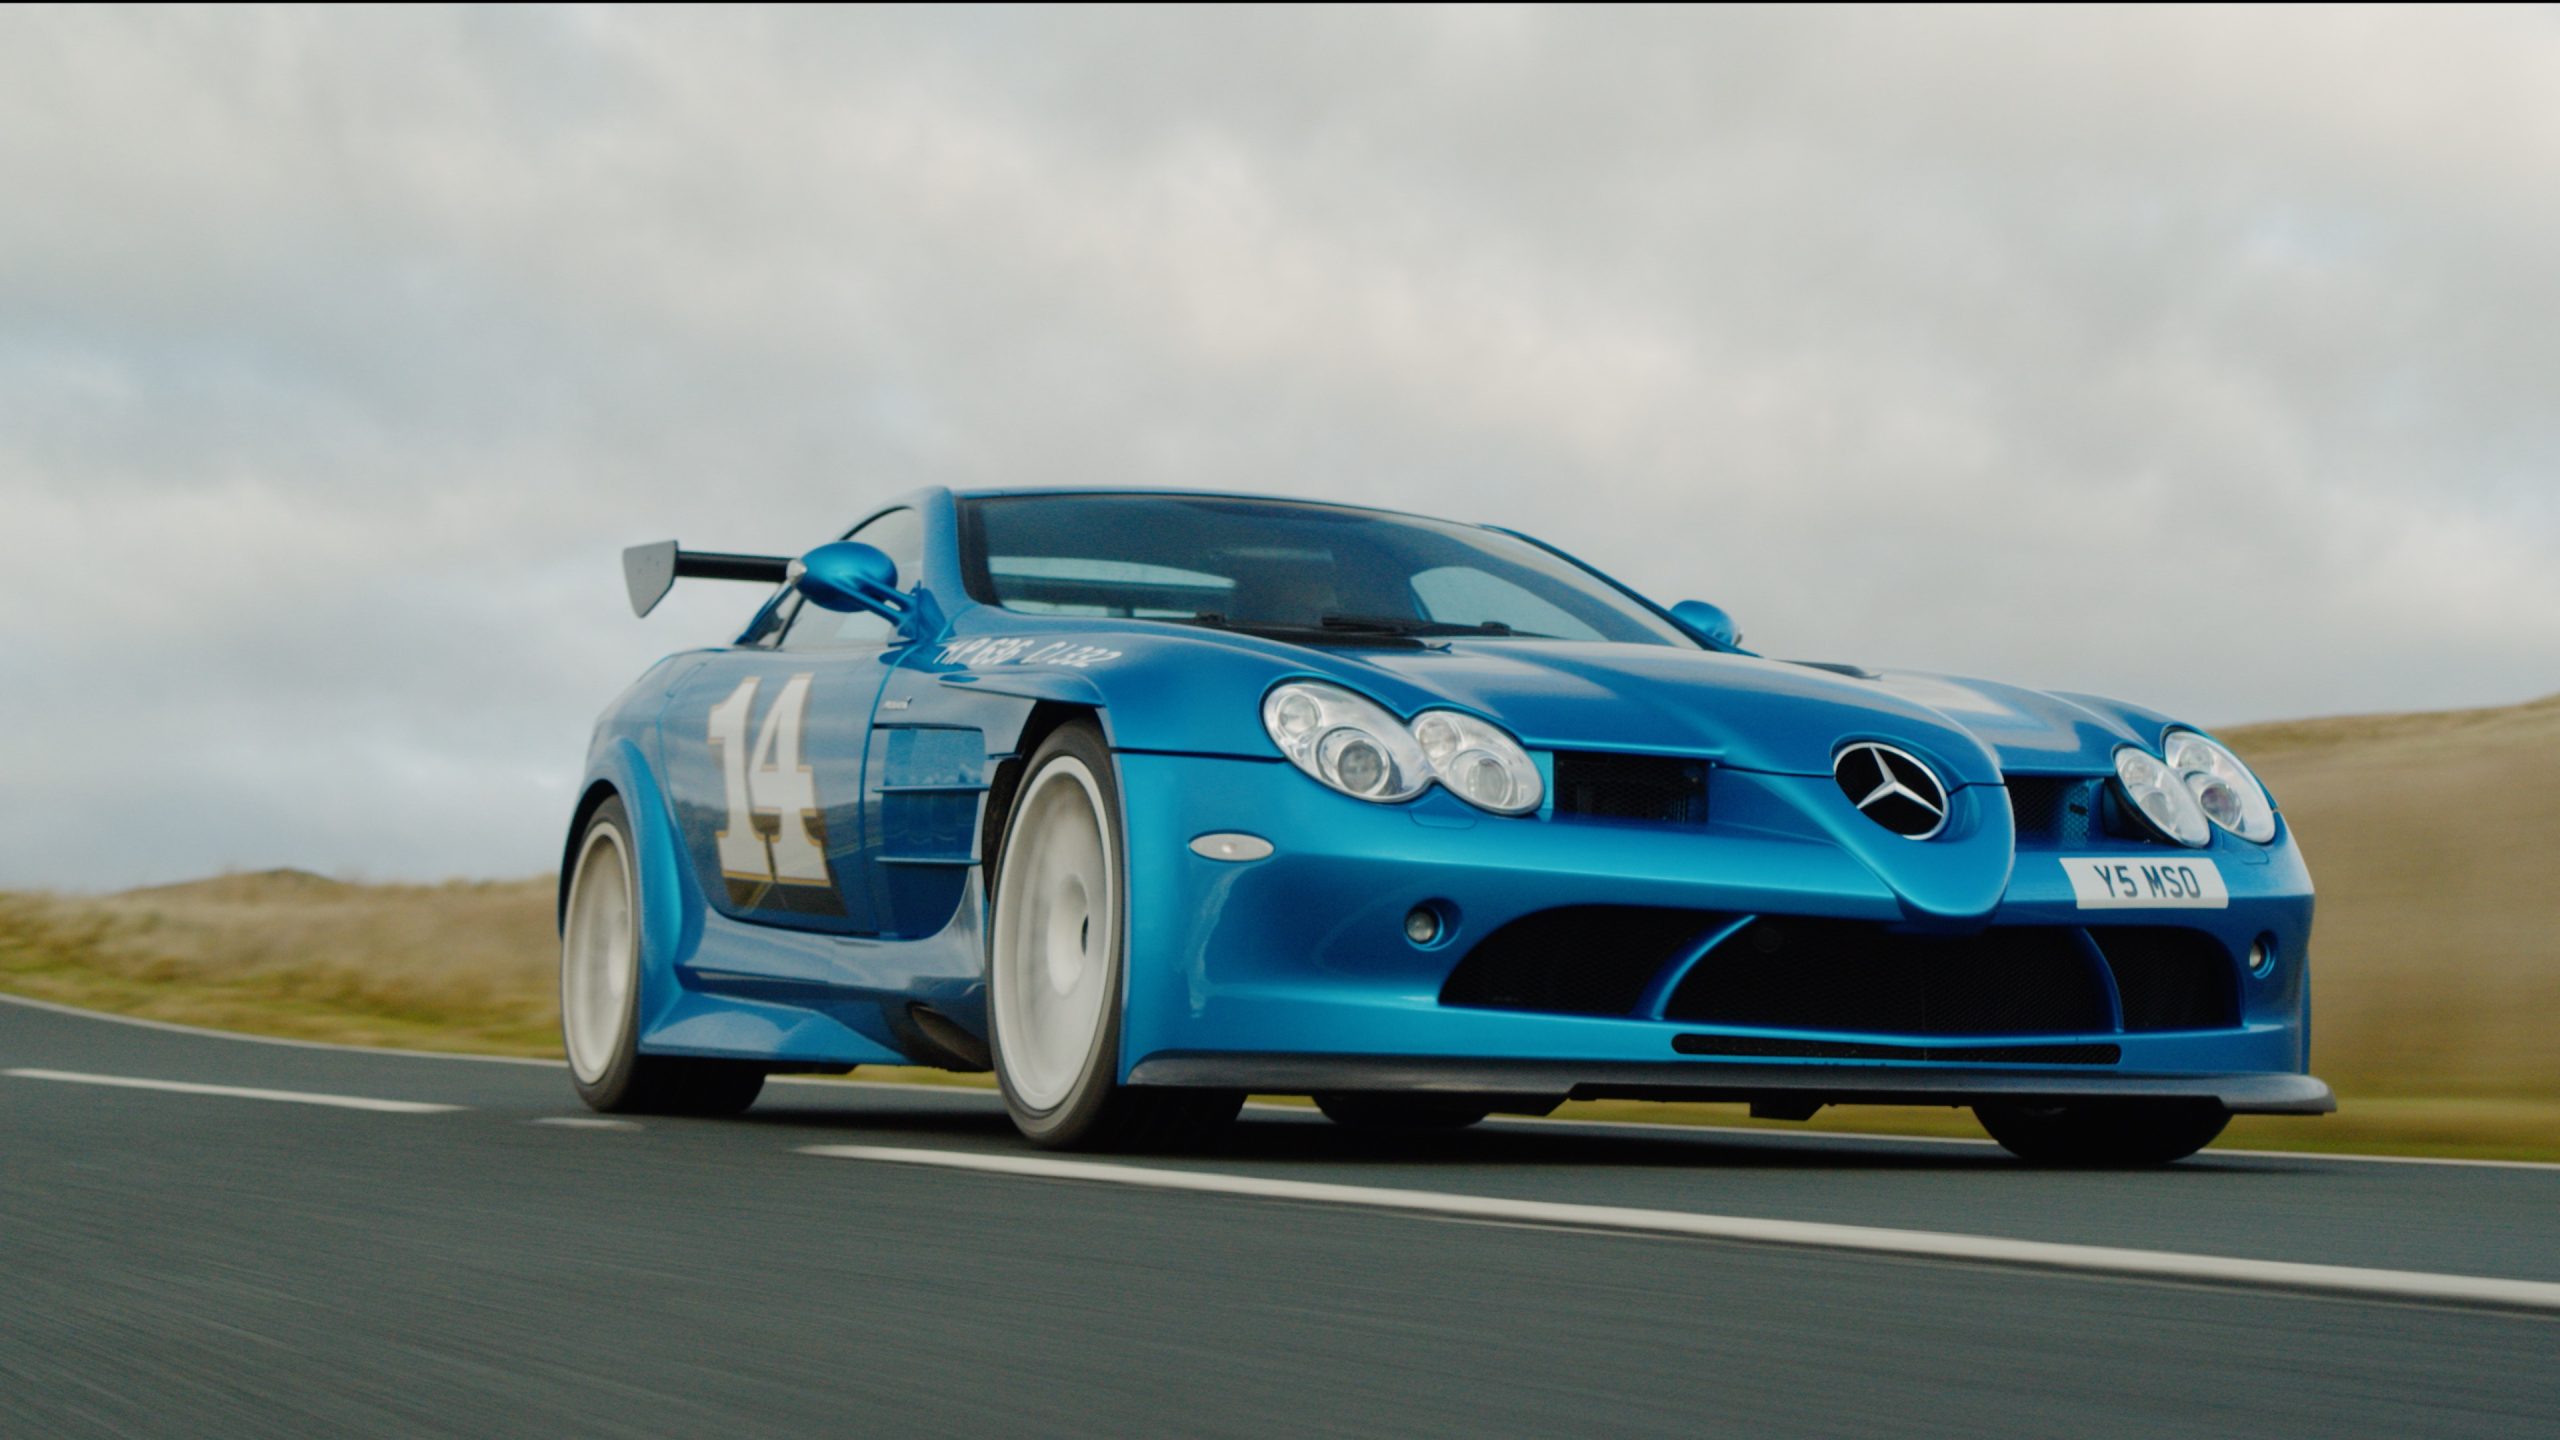 The beast is back: Taming the ‘new improved’ McLaren SLR HDK